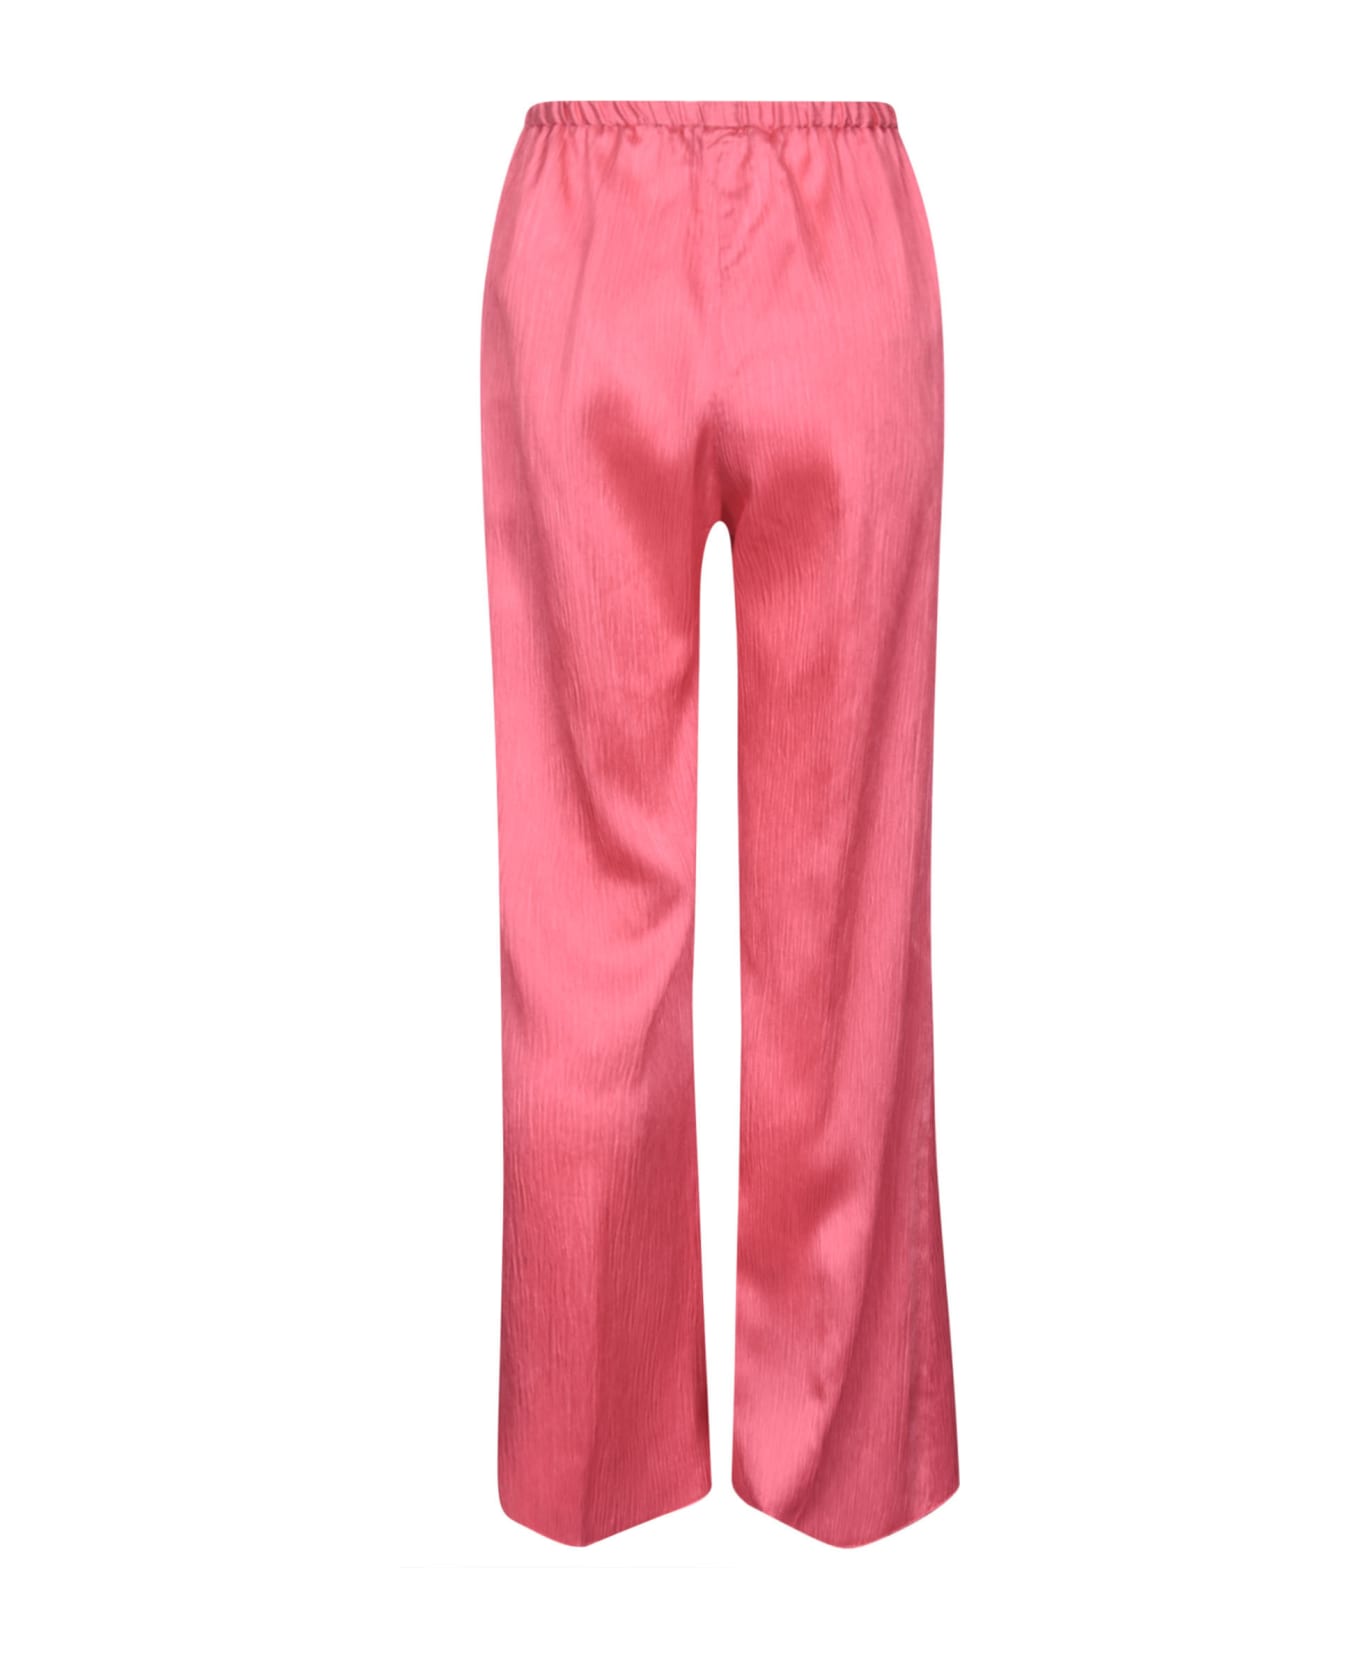 Forte_Forte Ribbed Waist Trousers - Pink ボトムス